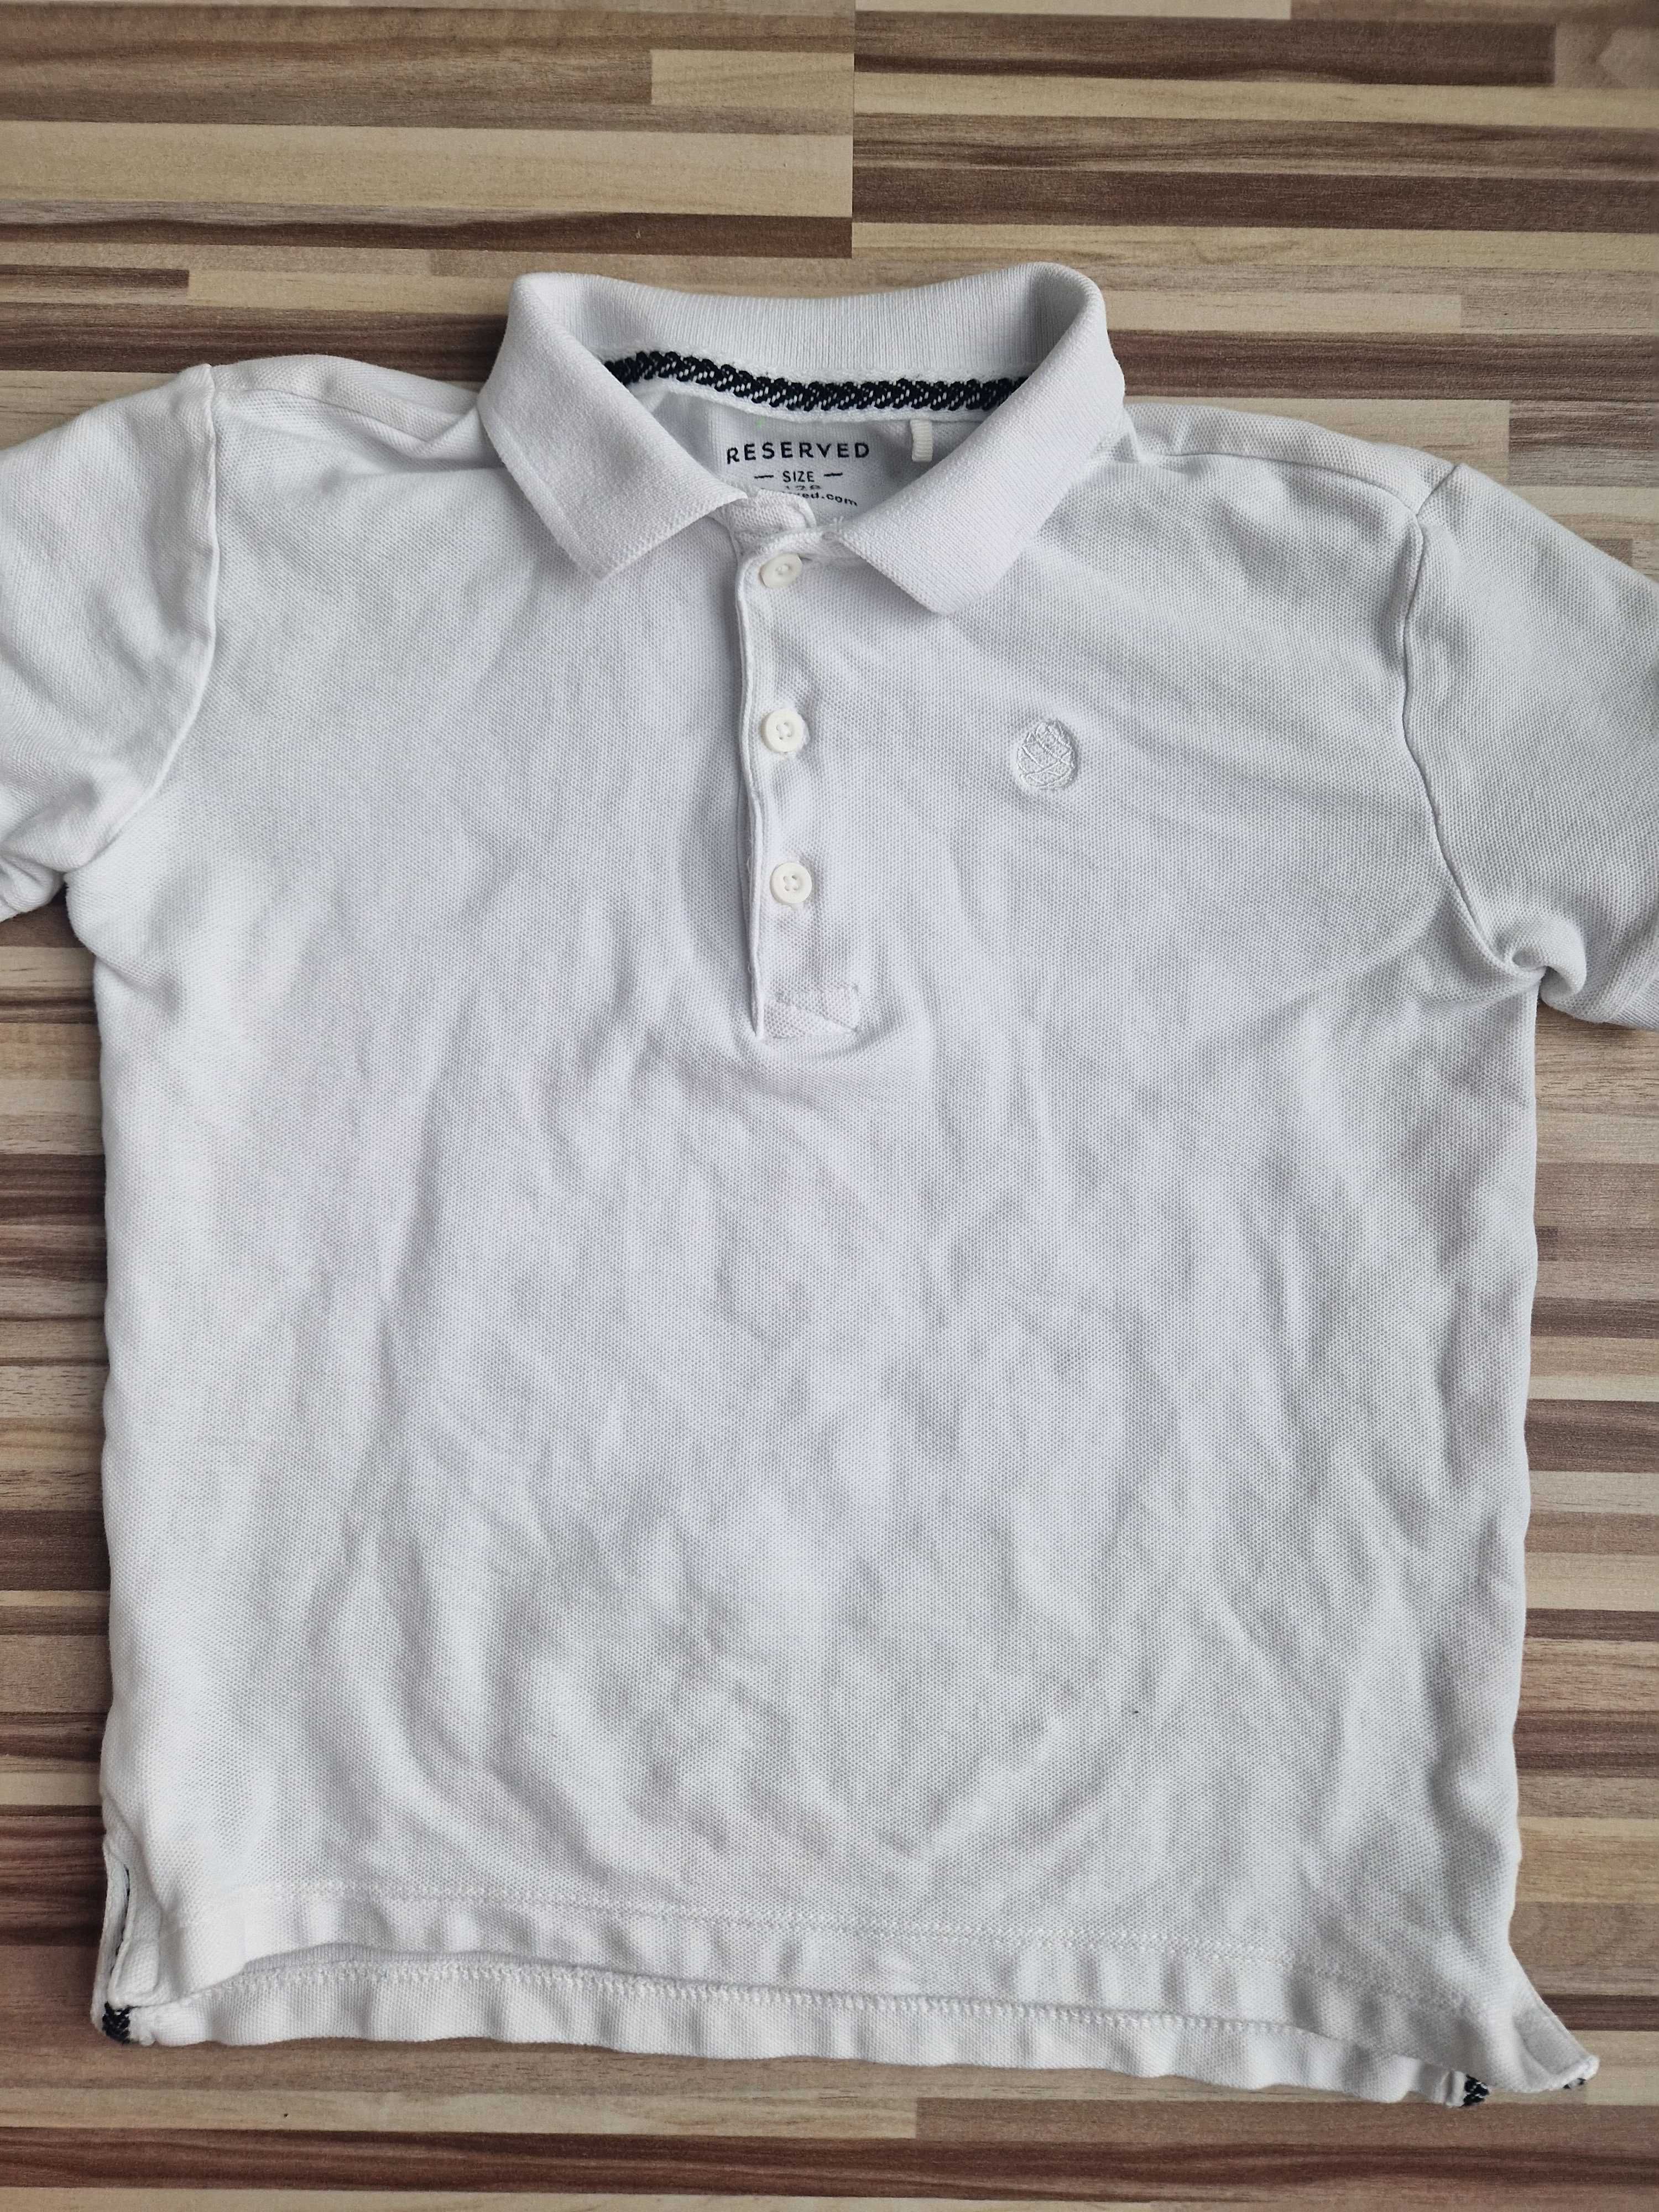 T shirt polo reserved 128 cm